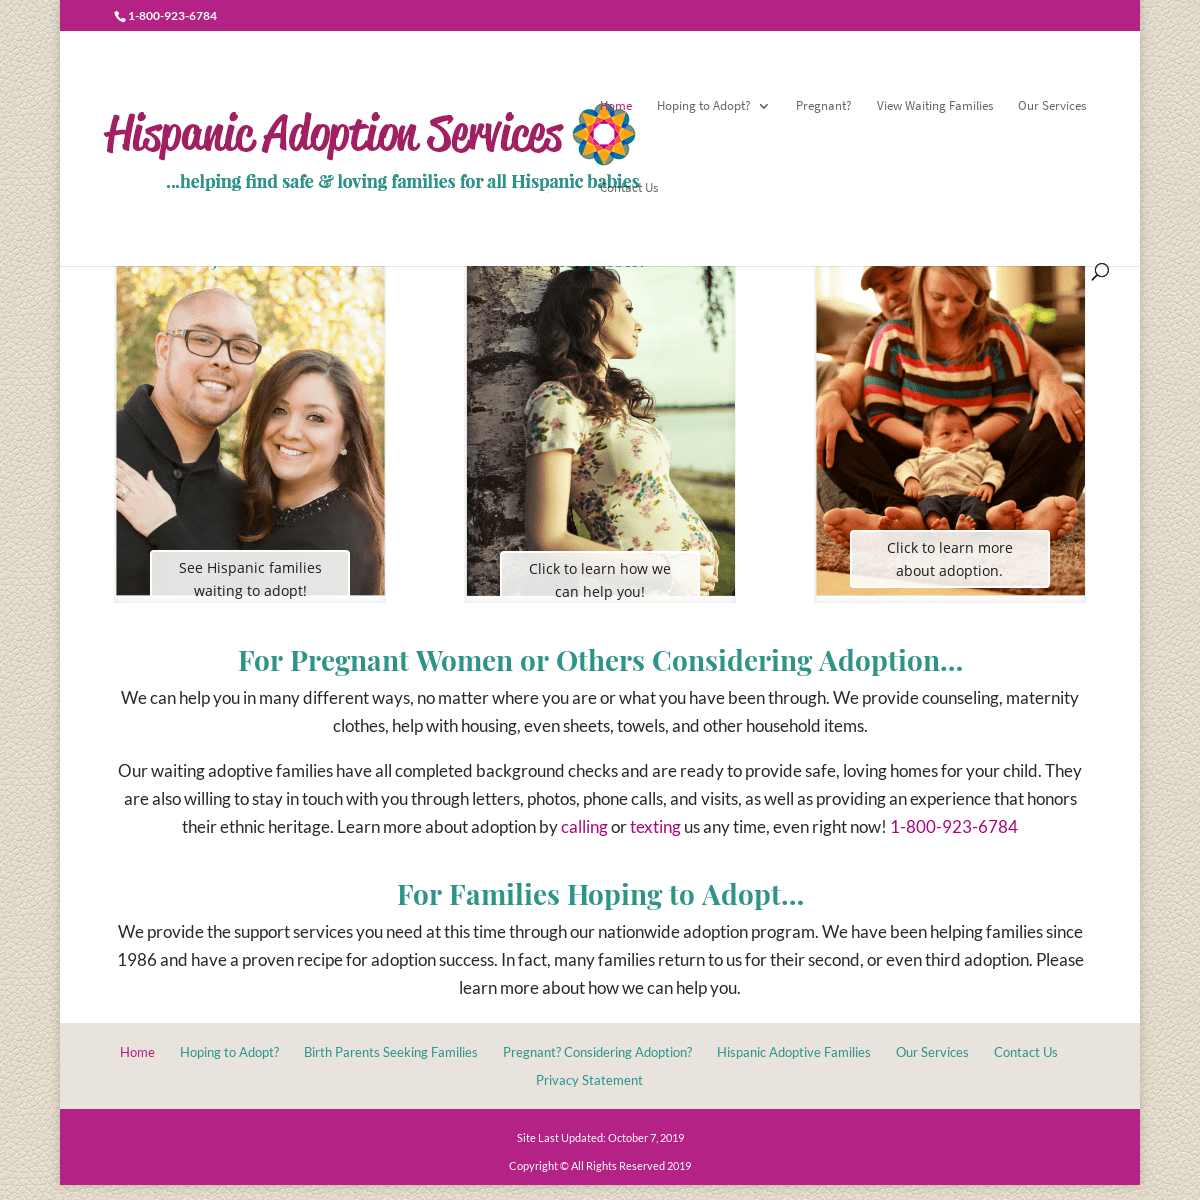 A complete backup of hispanicadoptionservices.com